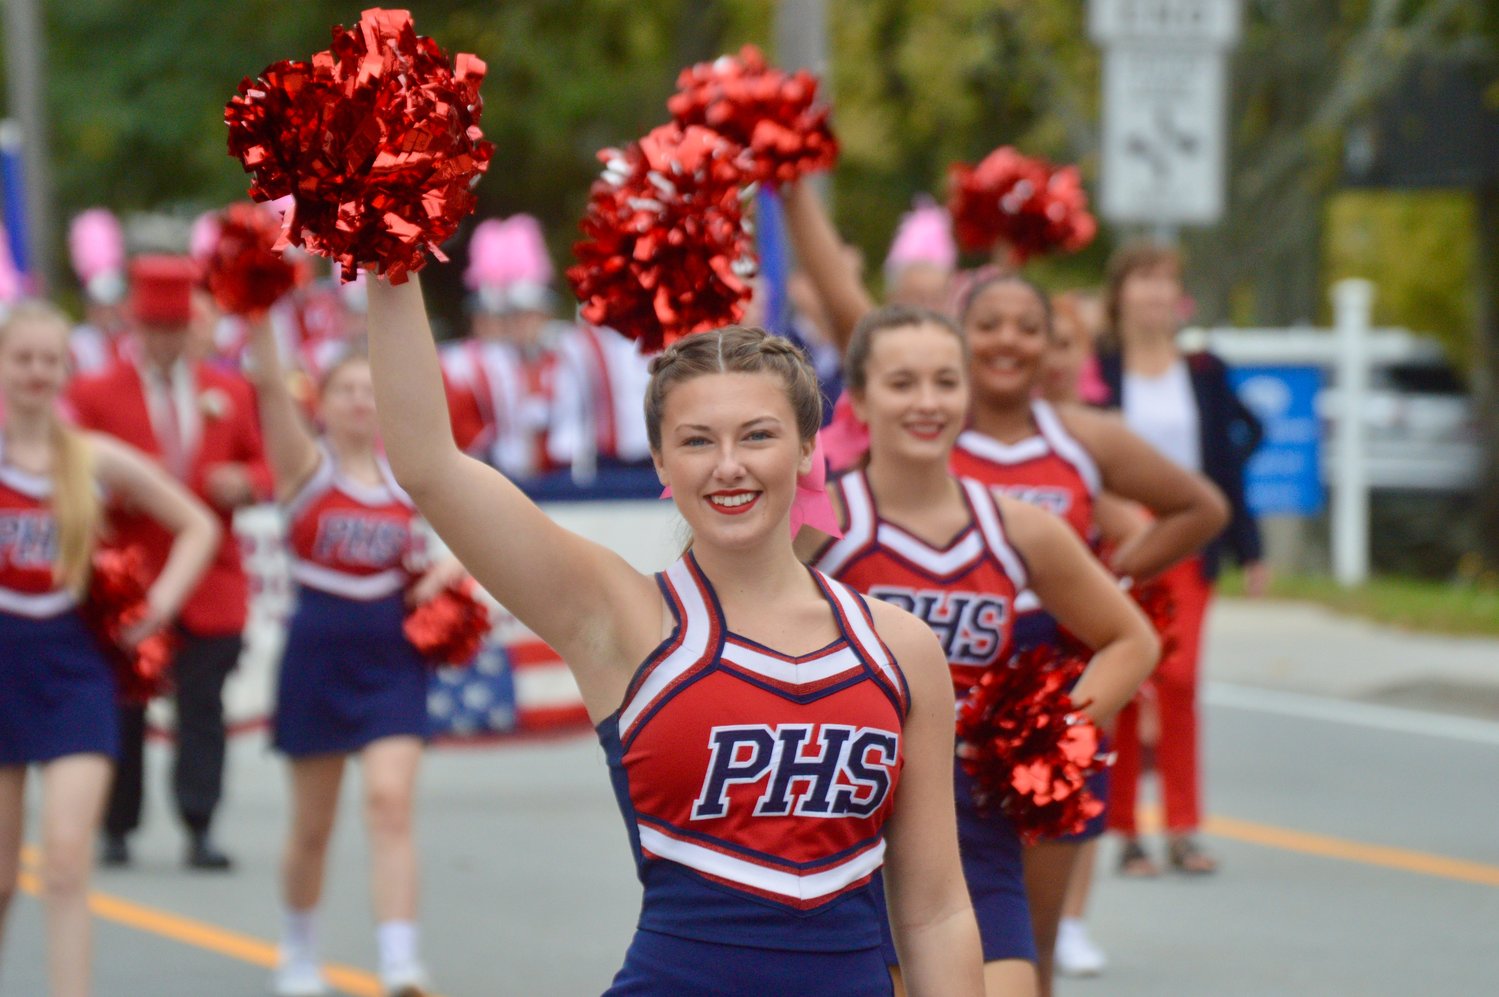 Cheerleader Phoebe Tavares, a junior, marches on East Main Road along with the rest of her squad in the Homecoming parade on Saturday.